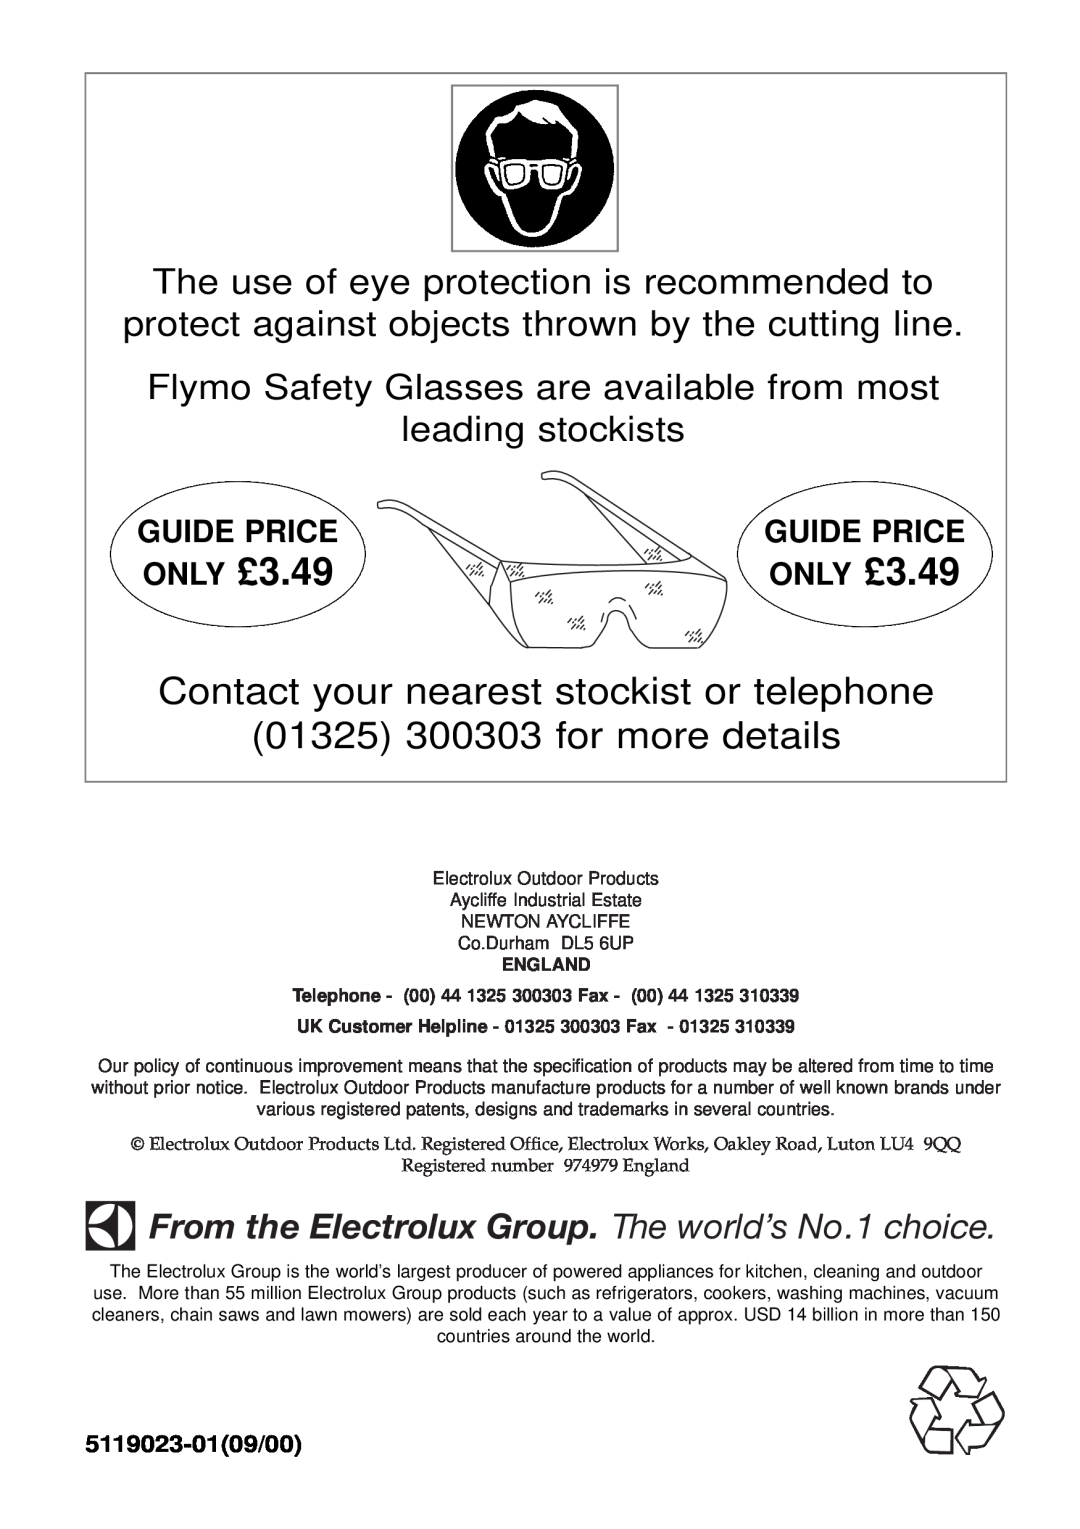 Flymo Auto 5119023-0109/00, Contact your nearest stockist or telephone, 01325 300303 for more details, Guide Price 